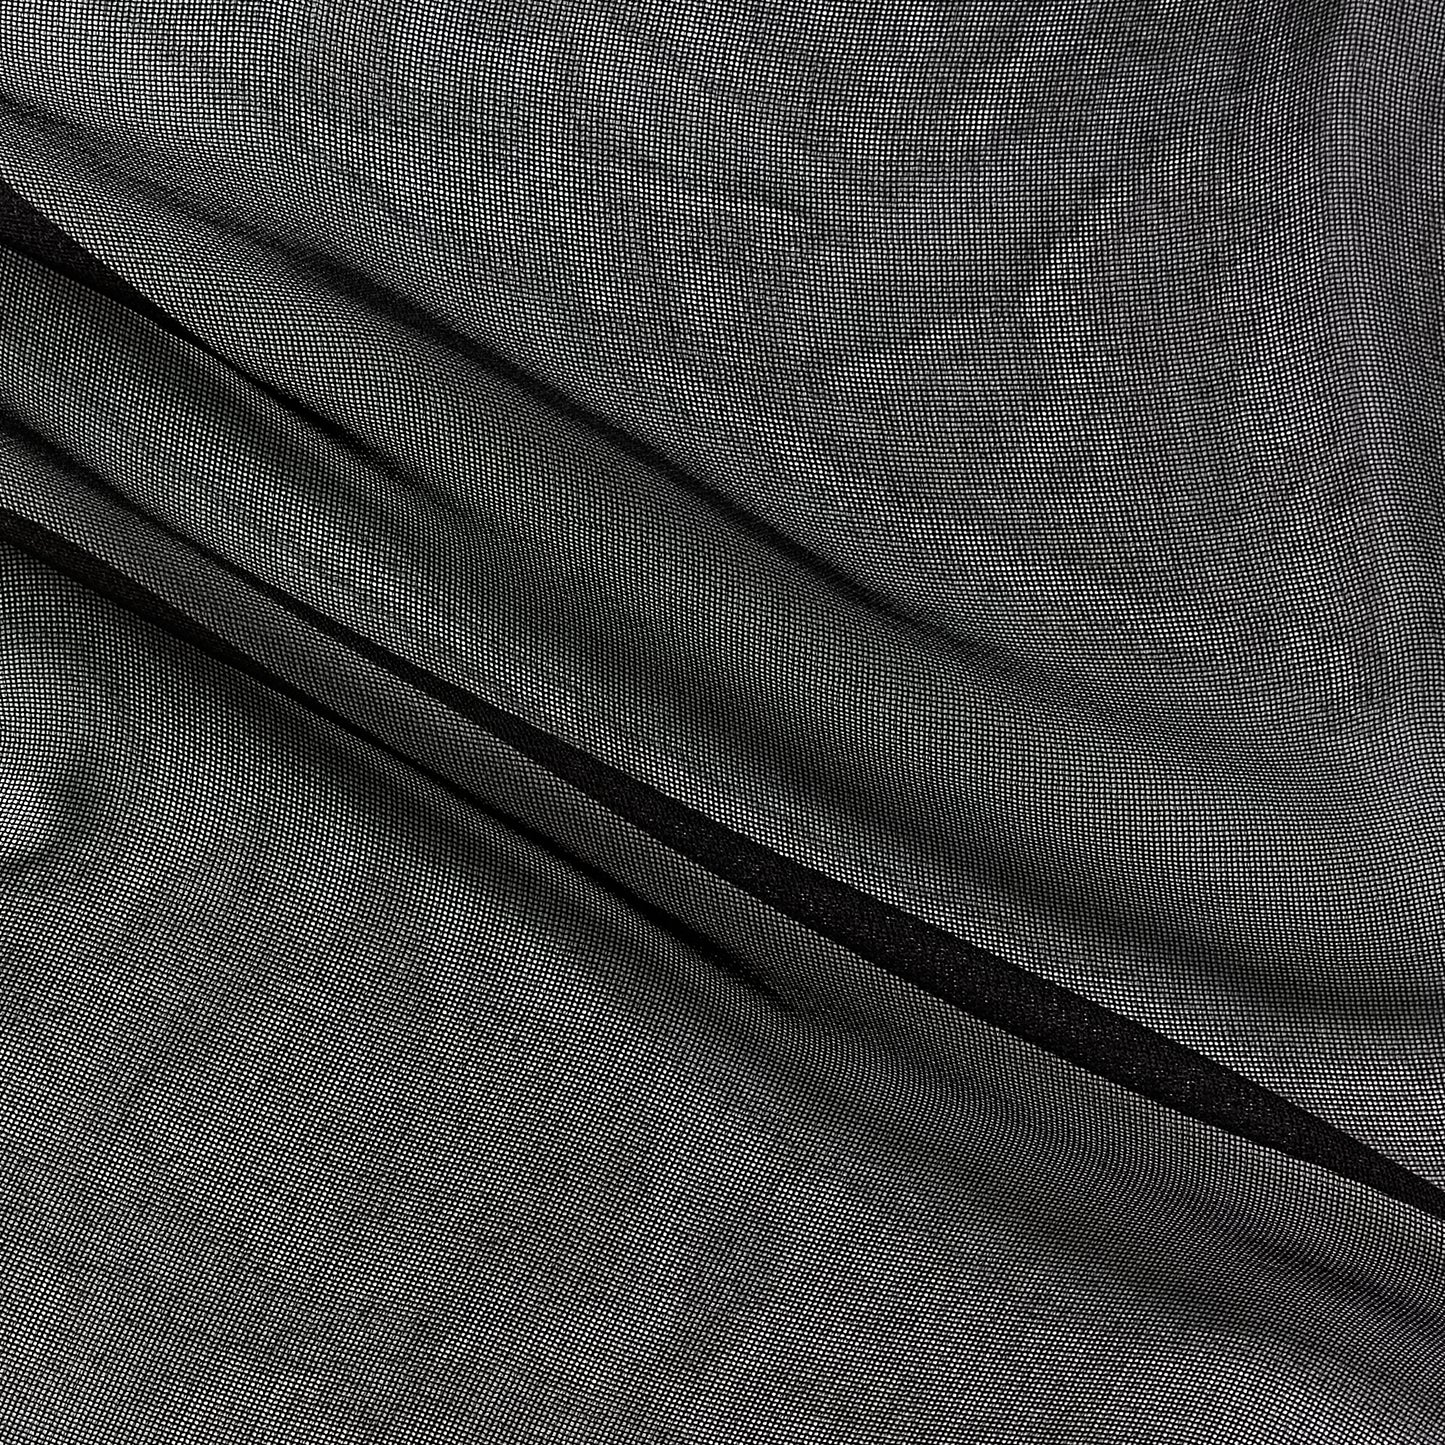 Ghost Mesh presenting the black variant of color fine and delicate pure silk mesh with subtle silk sheen